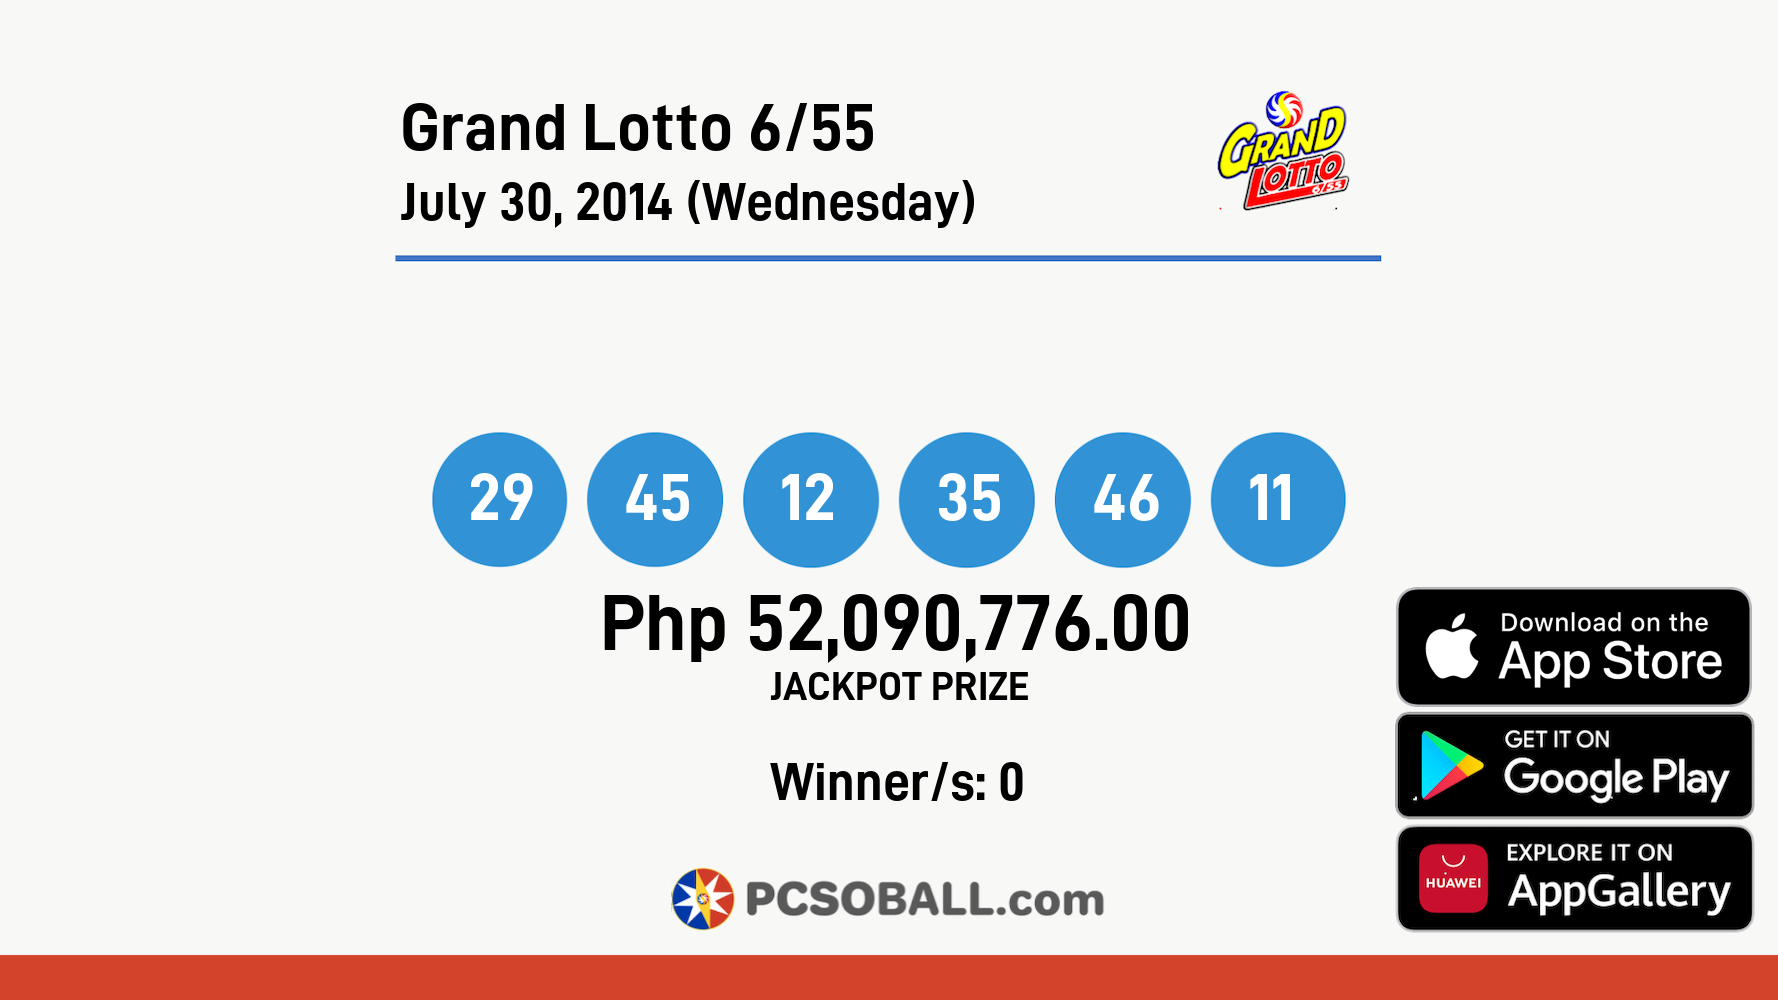 Grand Lotto 6/55 July 30, 2014 (Wednesday) Result